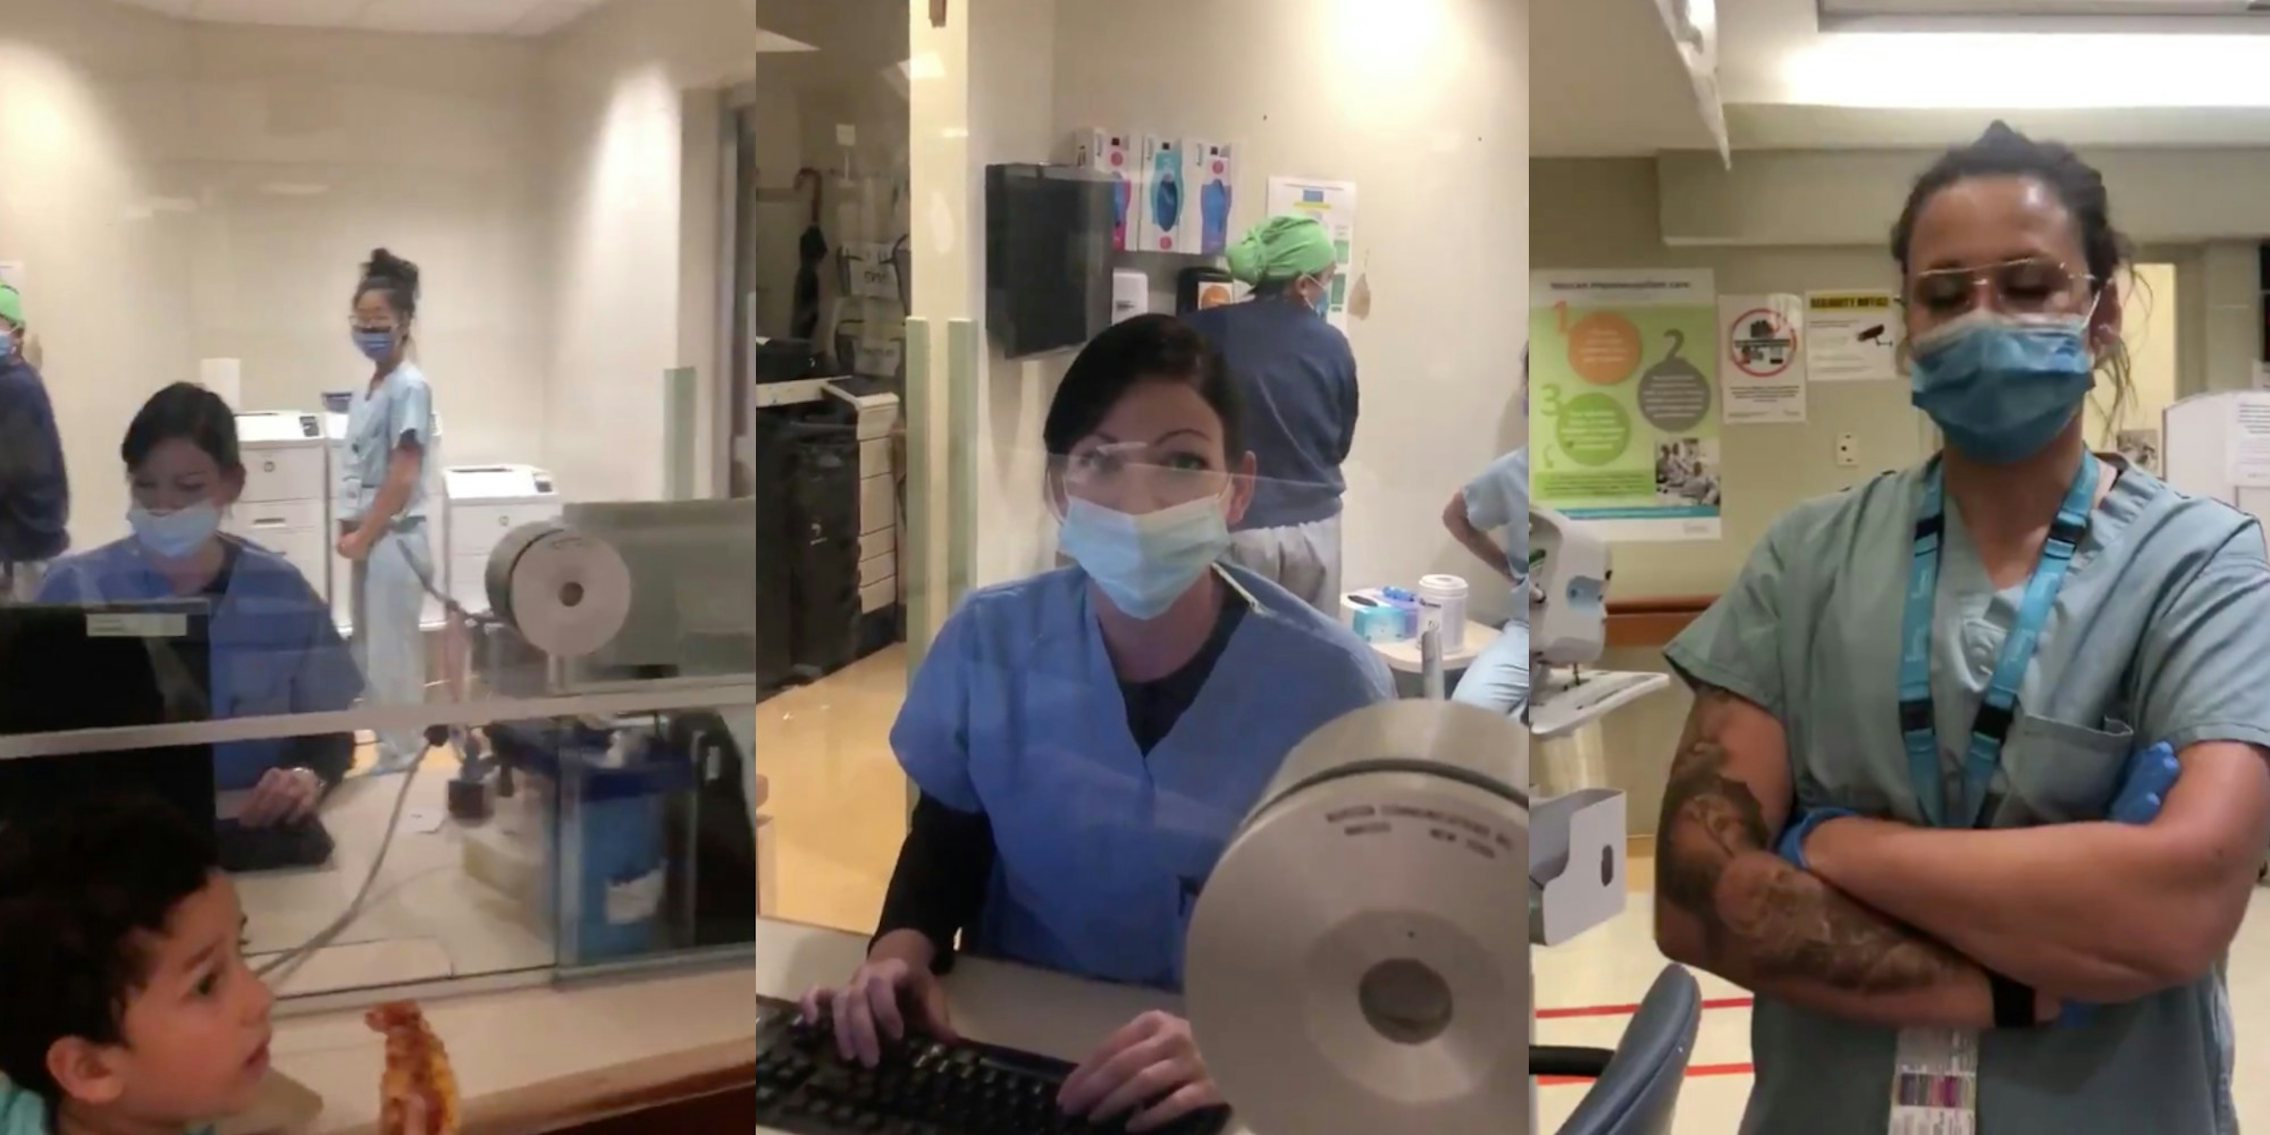 video of woman refusing to wear a mask in the hospital